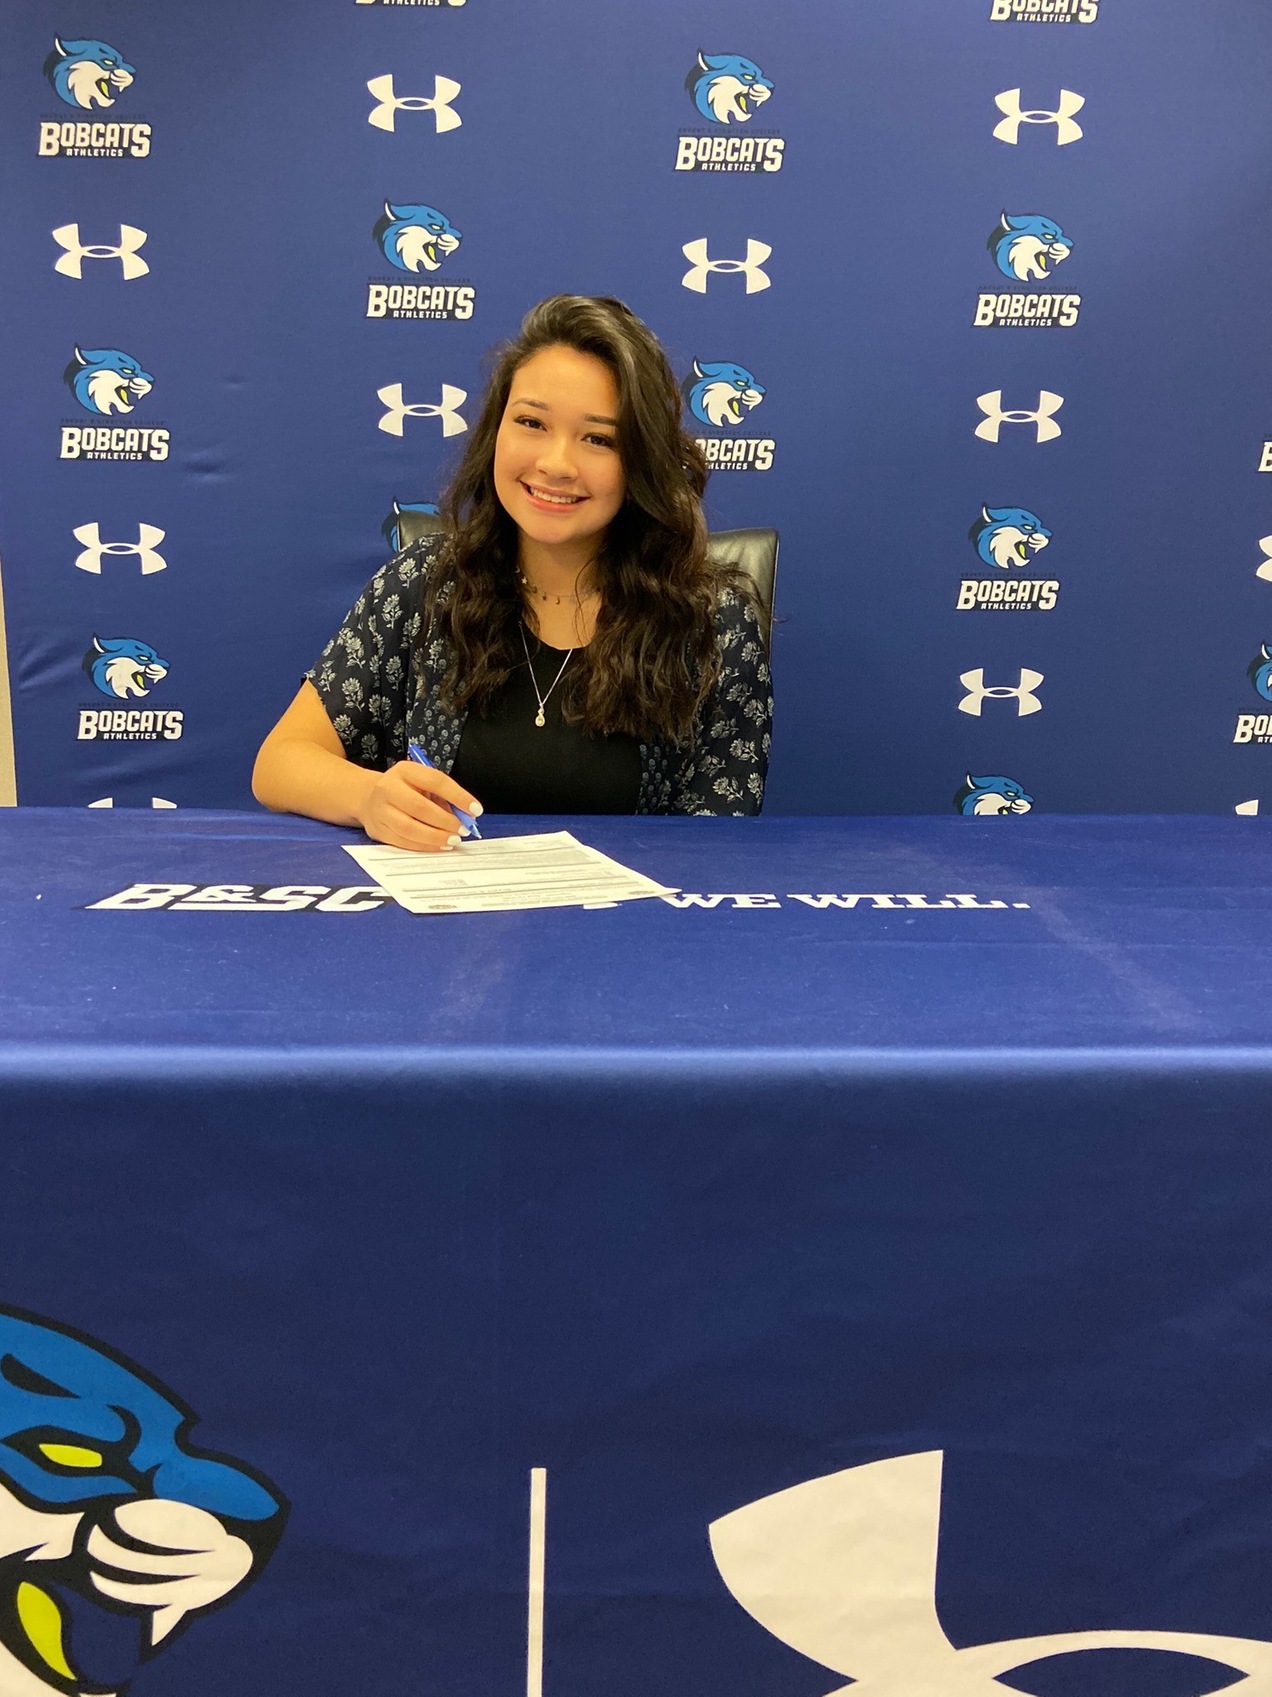 Abril Moreno, a defender from Kenosha, Wisconsin, signed her LOI